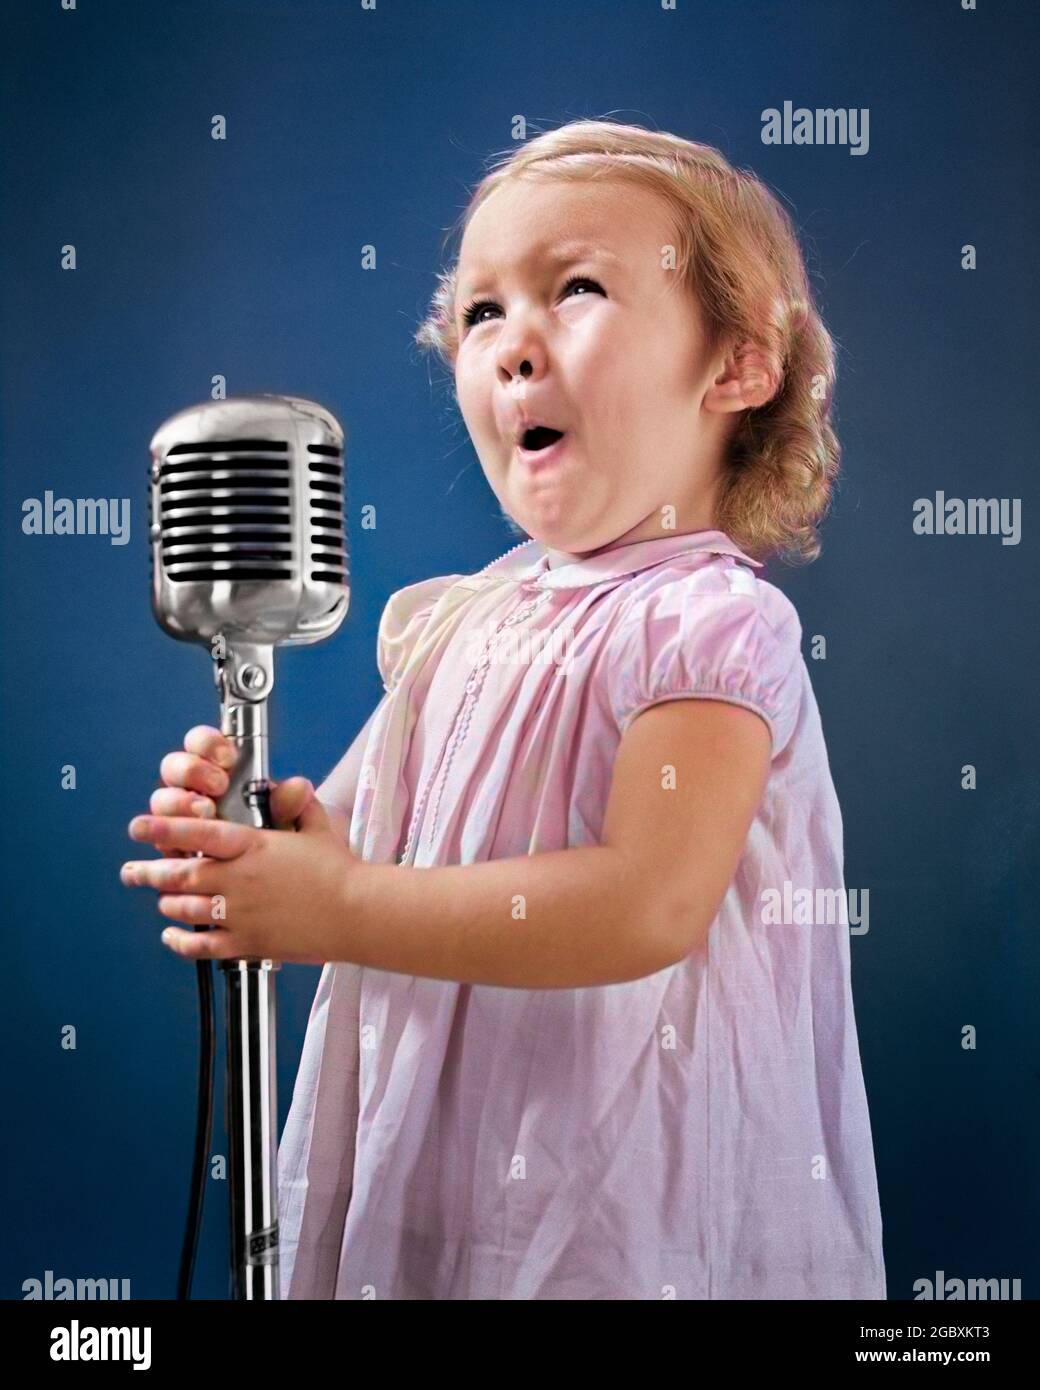 1940s LITTLE GIRL MAKING FACE SINGING INTO MICROPHONE - r13231c HAR001 HARS CUTE FACIAL COMMUNICATION BLOND SINGER COMPETITION FEMALES WINNING STUDIO SHOT PORTRAITS COPY SPACE HALF-LENGTH SPEAK SING ENTERTAINMENT PERFORMING PERFORMING ARTS HAPPINESS RADIOS PERFORMER AUDITION EXCITEMENT SONG VOICE VOCAL OCCUPATIONS LITTLE GIRL POISE CLOSE-UP PERFORM PLEASANT STARLET AGREEABLE CHARMING CHROME CLOSE UP COMPETITOR DEBUT GROWTH JUVENILES LOVABLE MIKE PLEASING YOUNGSTER ADORABLE APPEALING CAUCASIAN ETHNICITY COMPETE HAR001 OLD FASHIONED Stock Photo